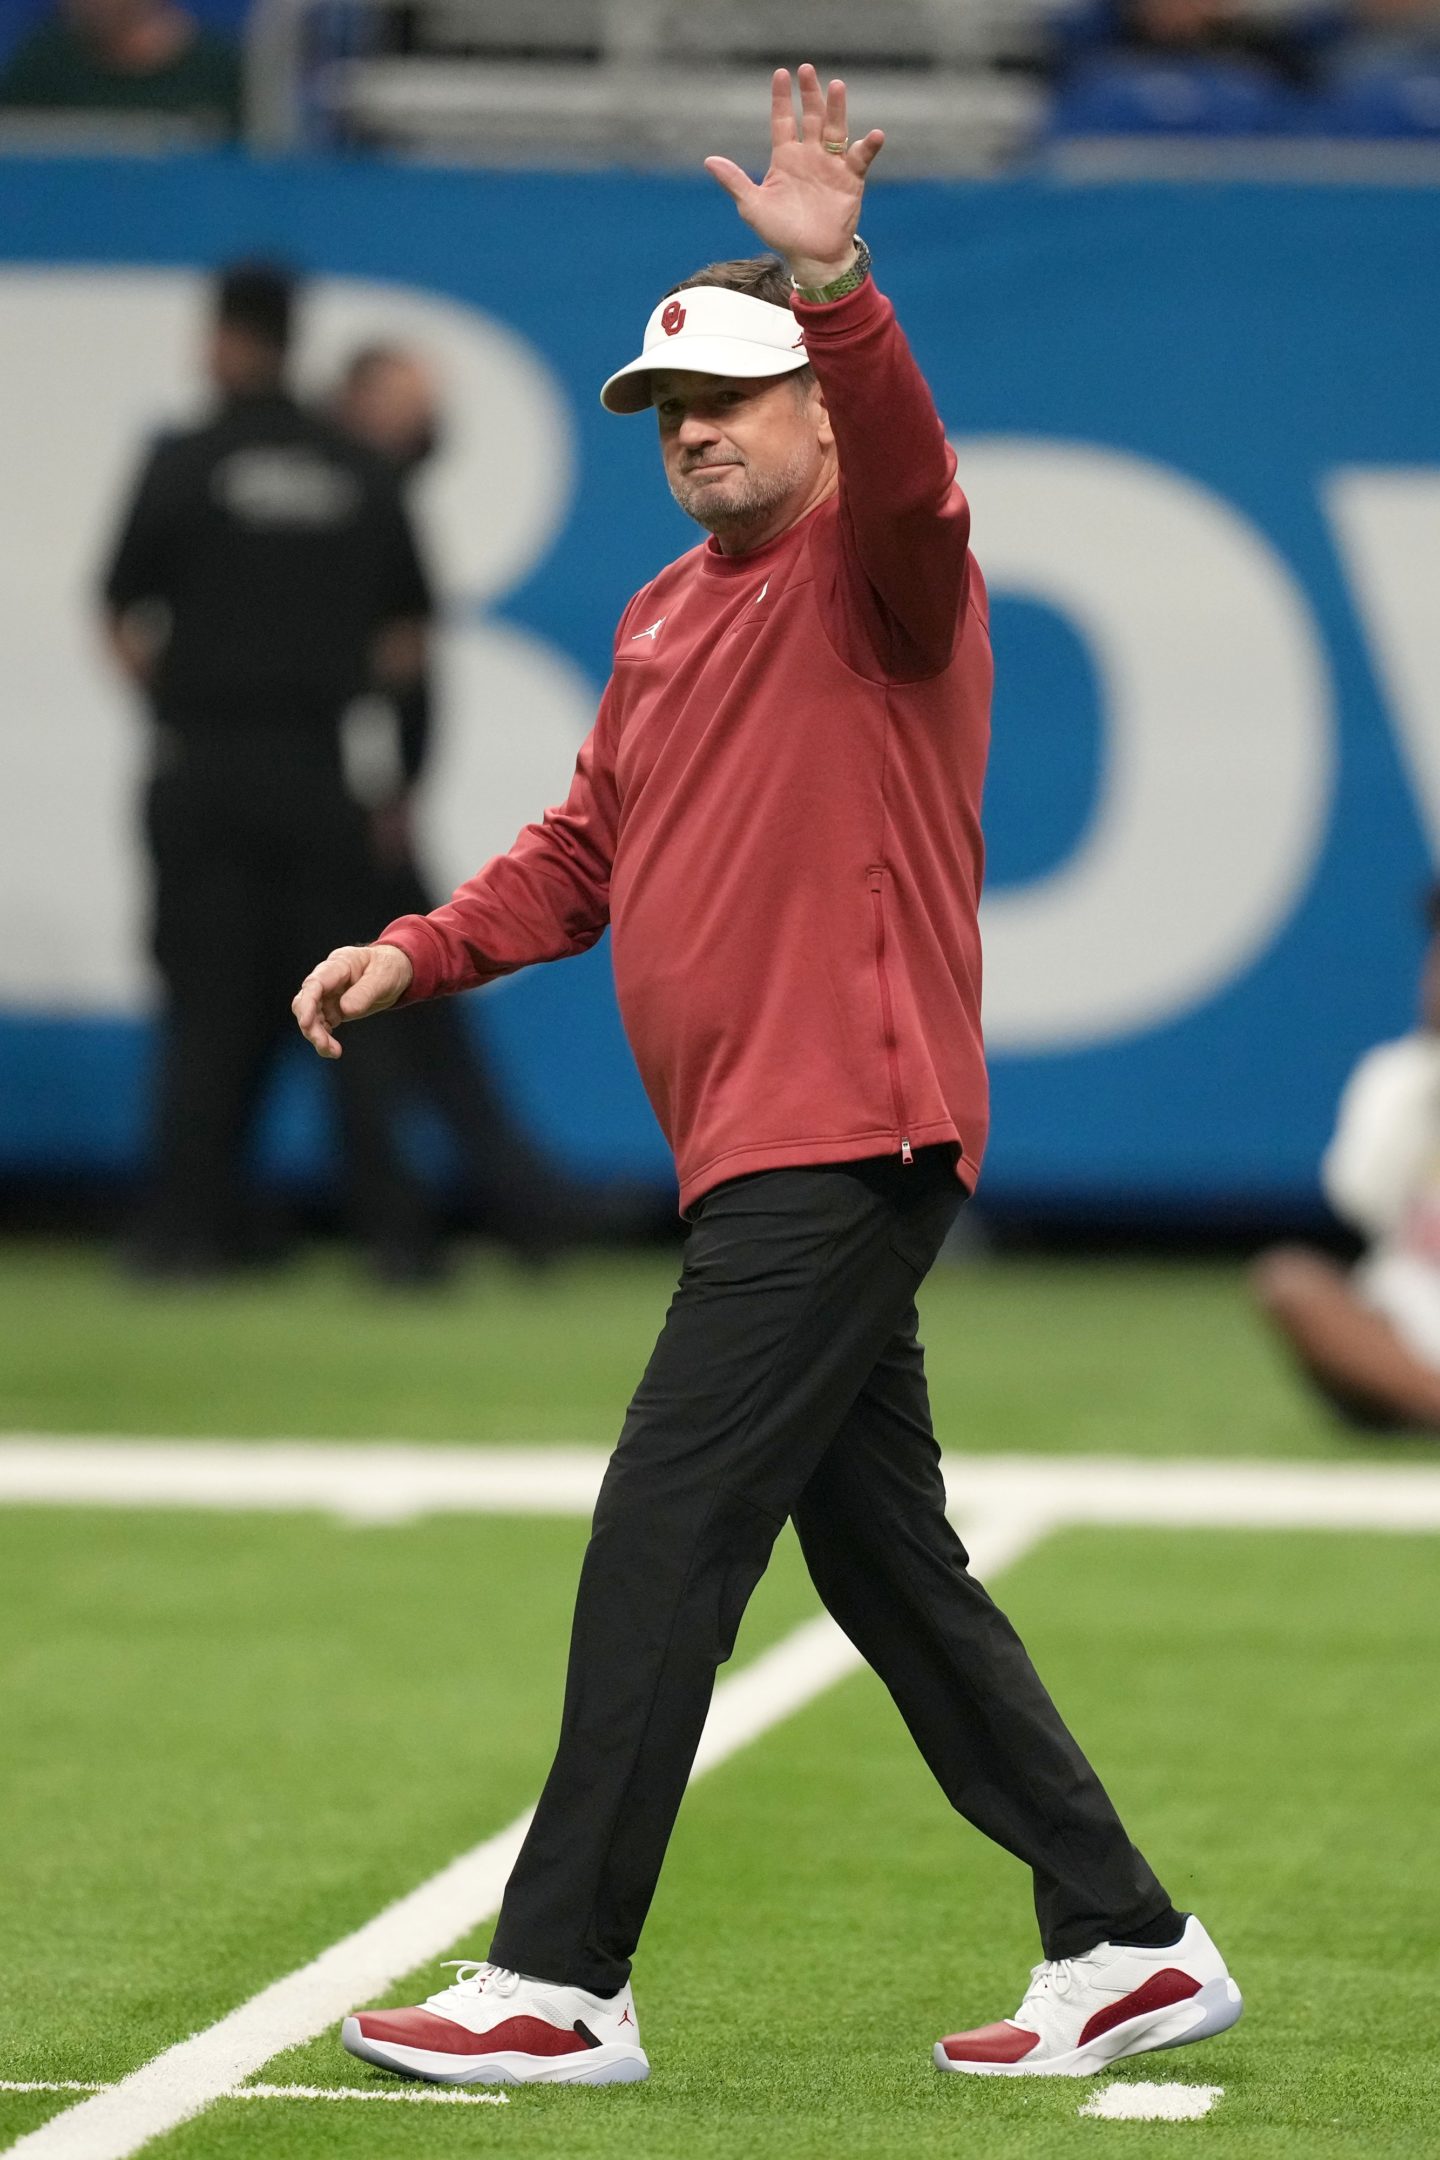 Bob Stoops OU’s legendary coach ready for next stop in XFL